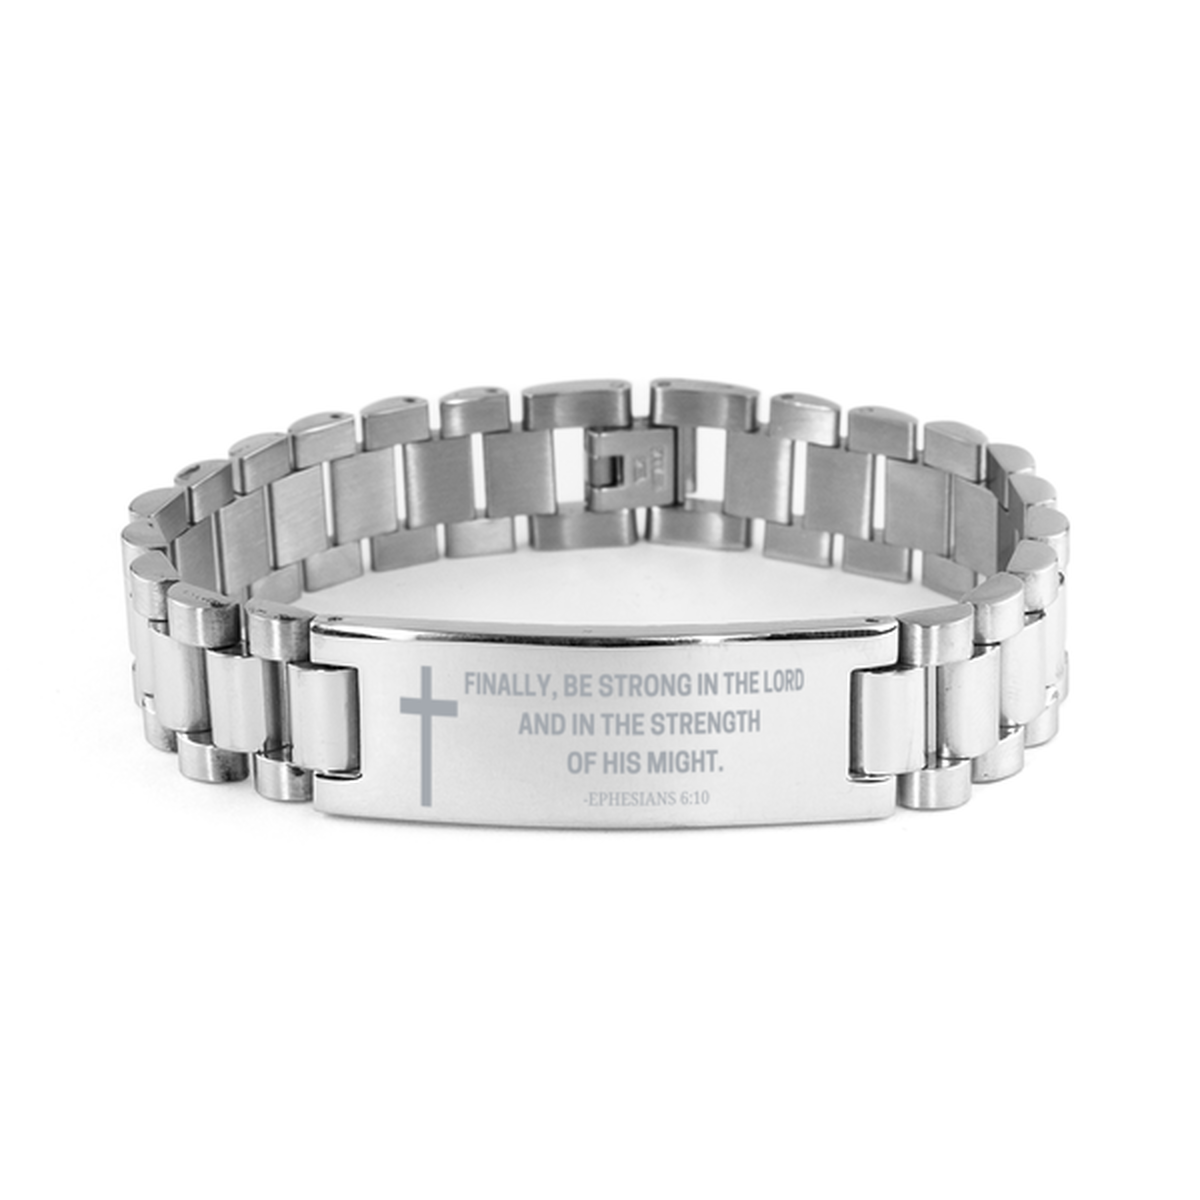 Baptism Gifts For Teenage Boys Girls, Christian Bible Verse Ladder Stainless Steel Bracelet, Finally, be strong in the Lord Catholic Confirmation Gifts for Son, Godson, Grandson, Nephew